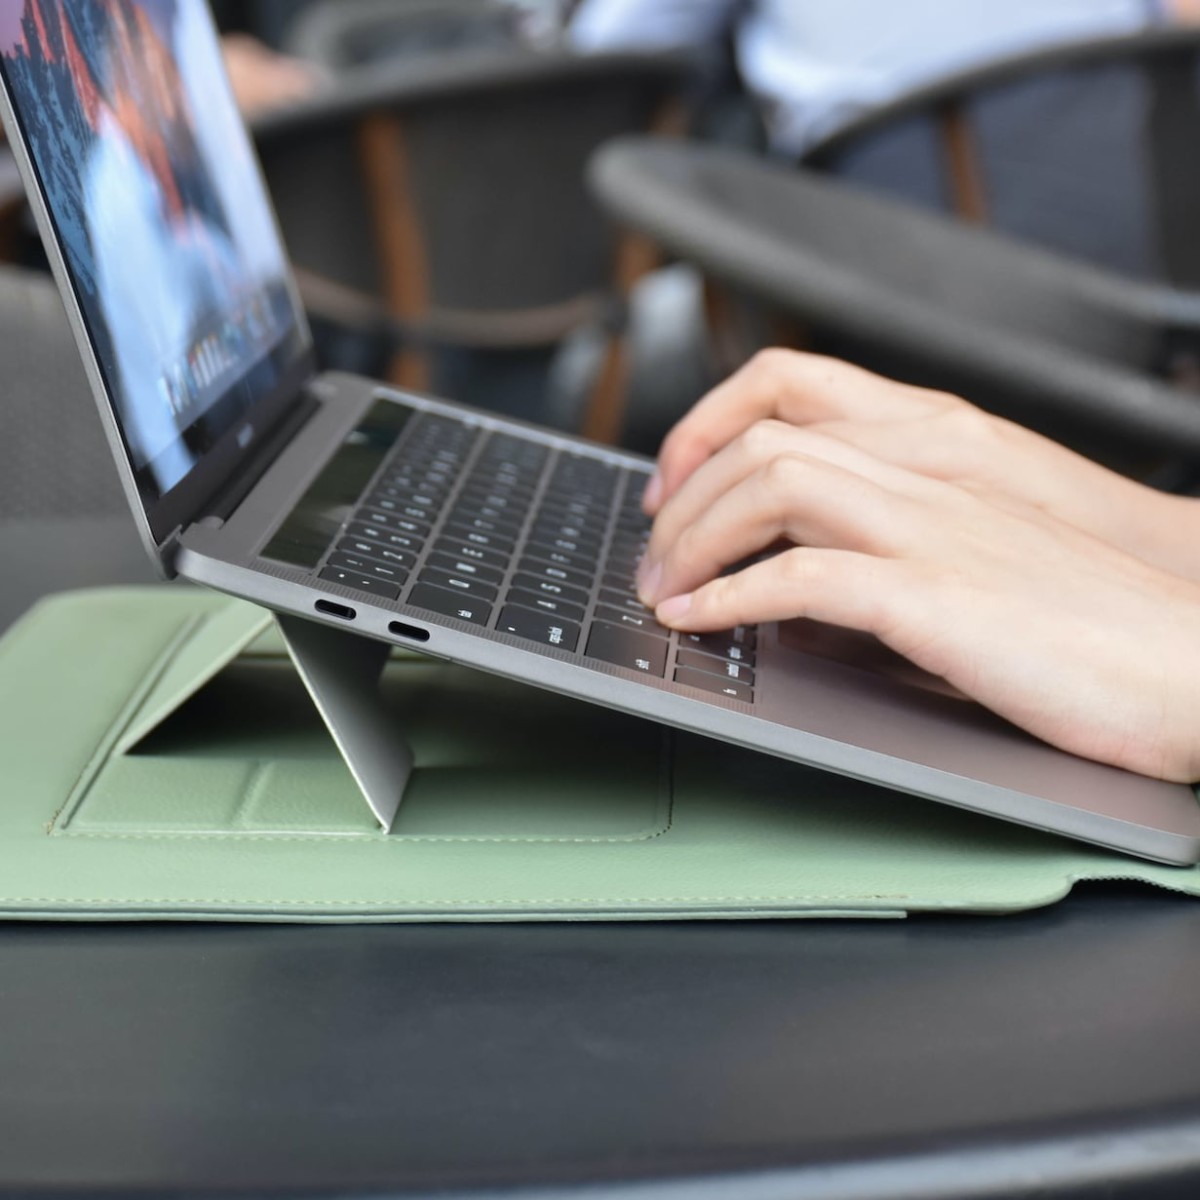 SINEX Multifunctional Laptop Stand Case helps you get to work in seconds